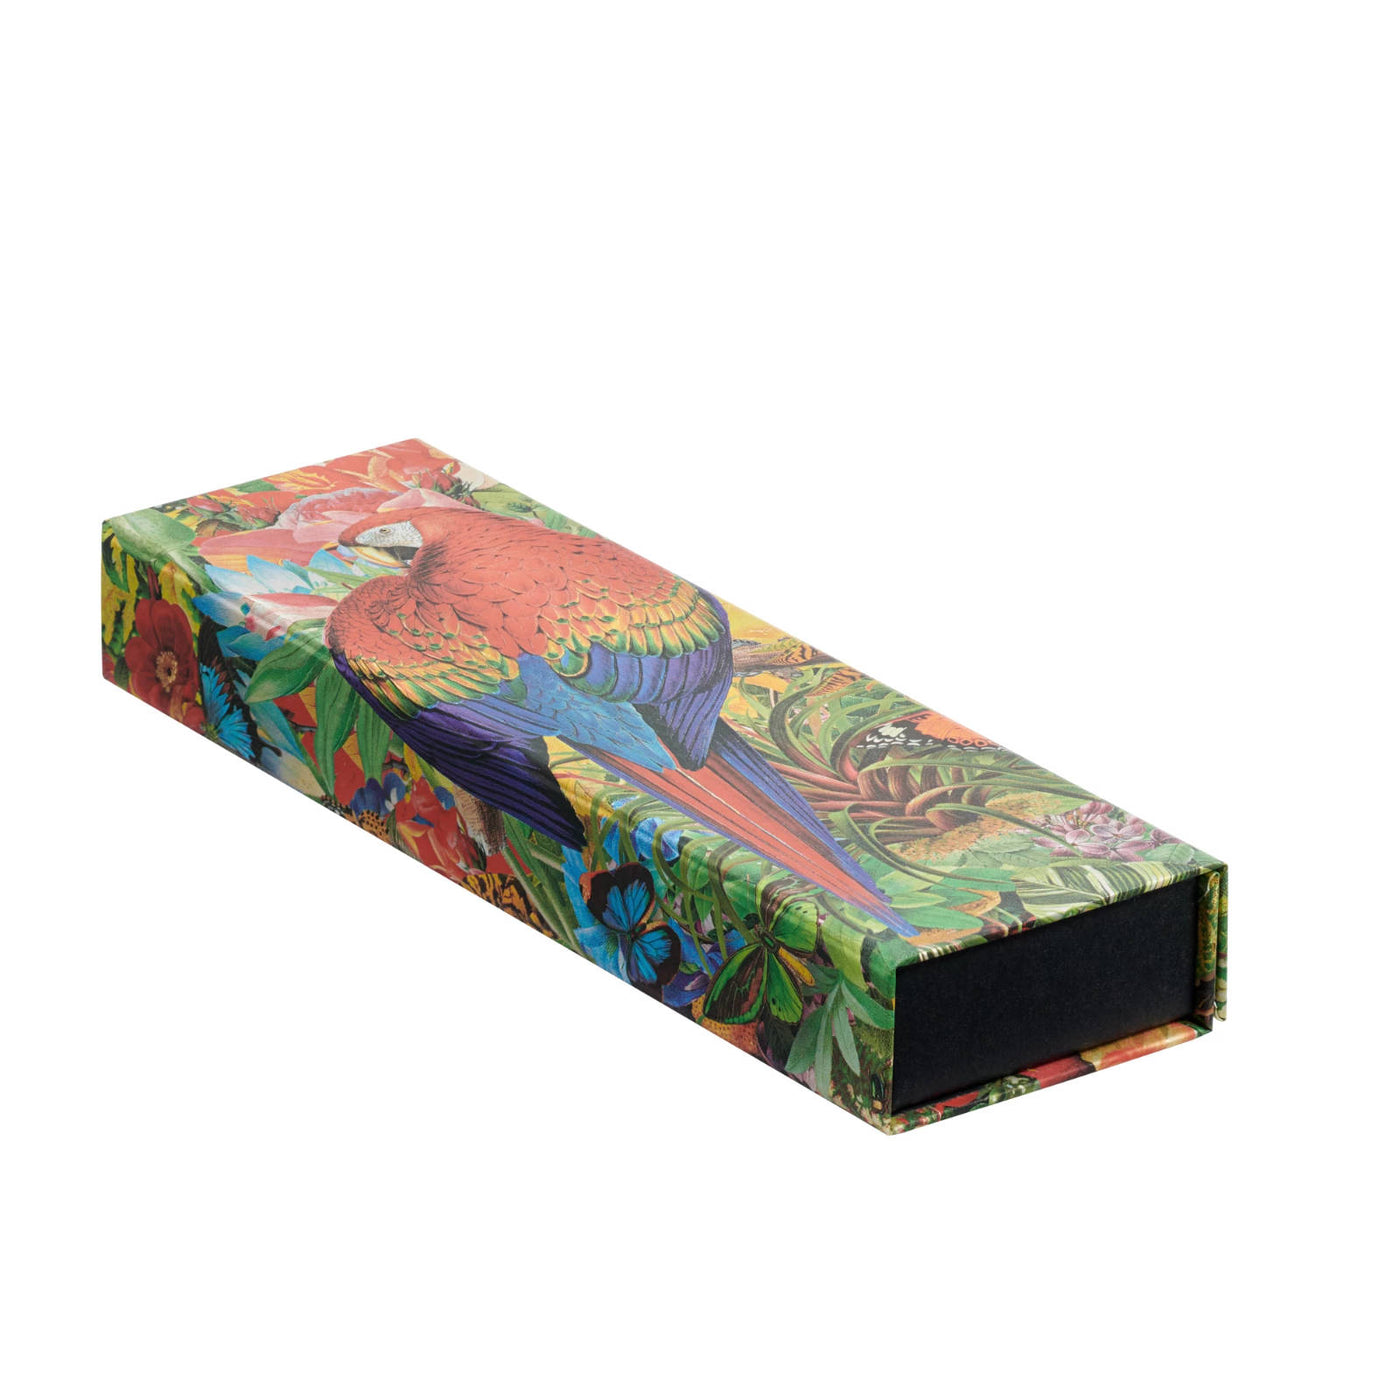 Paperblanks Nature Montages Tropical Garden Pencil Case